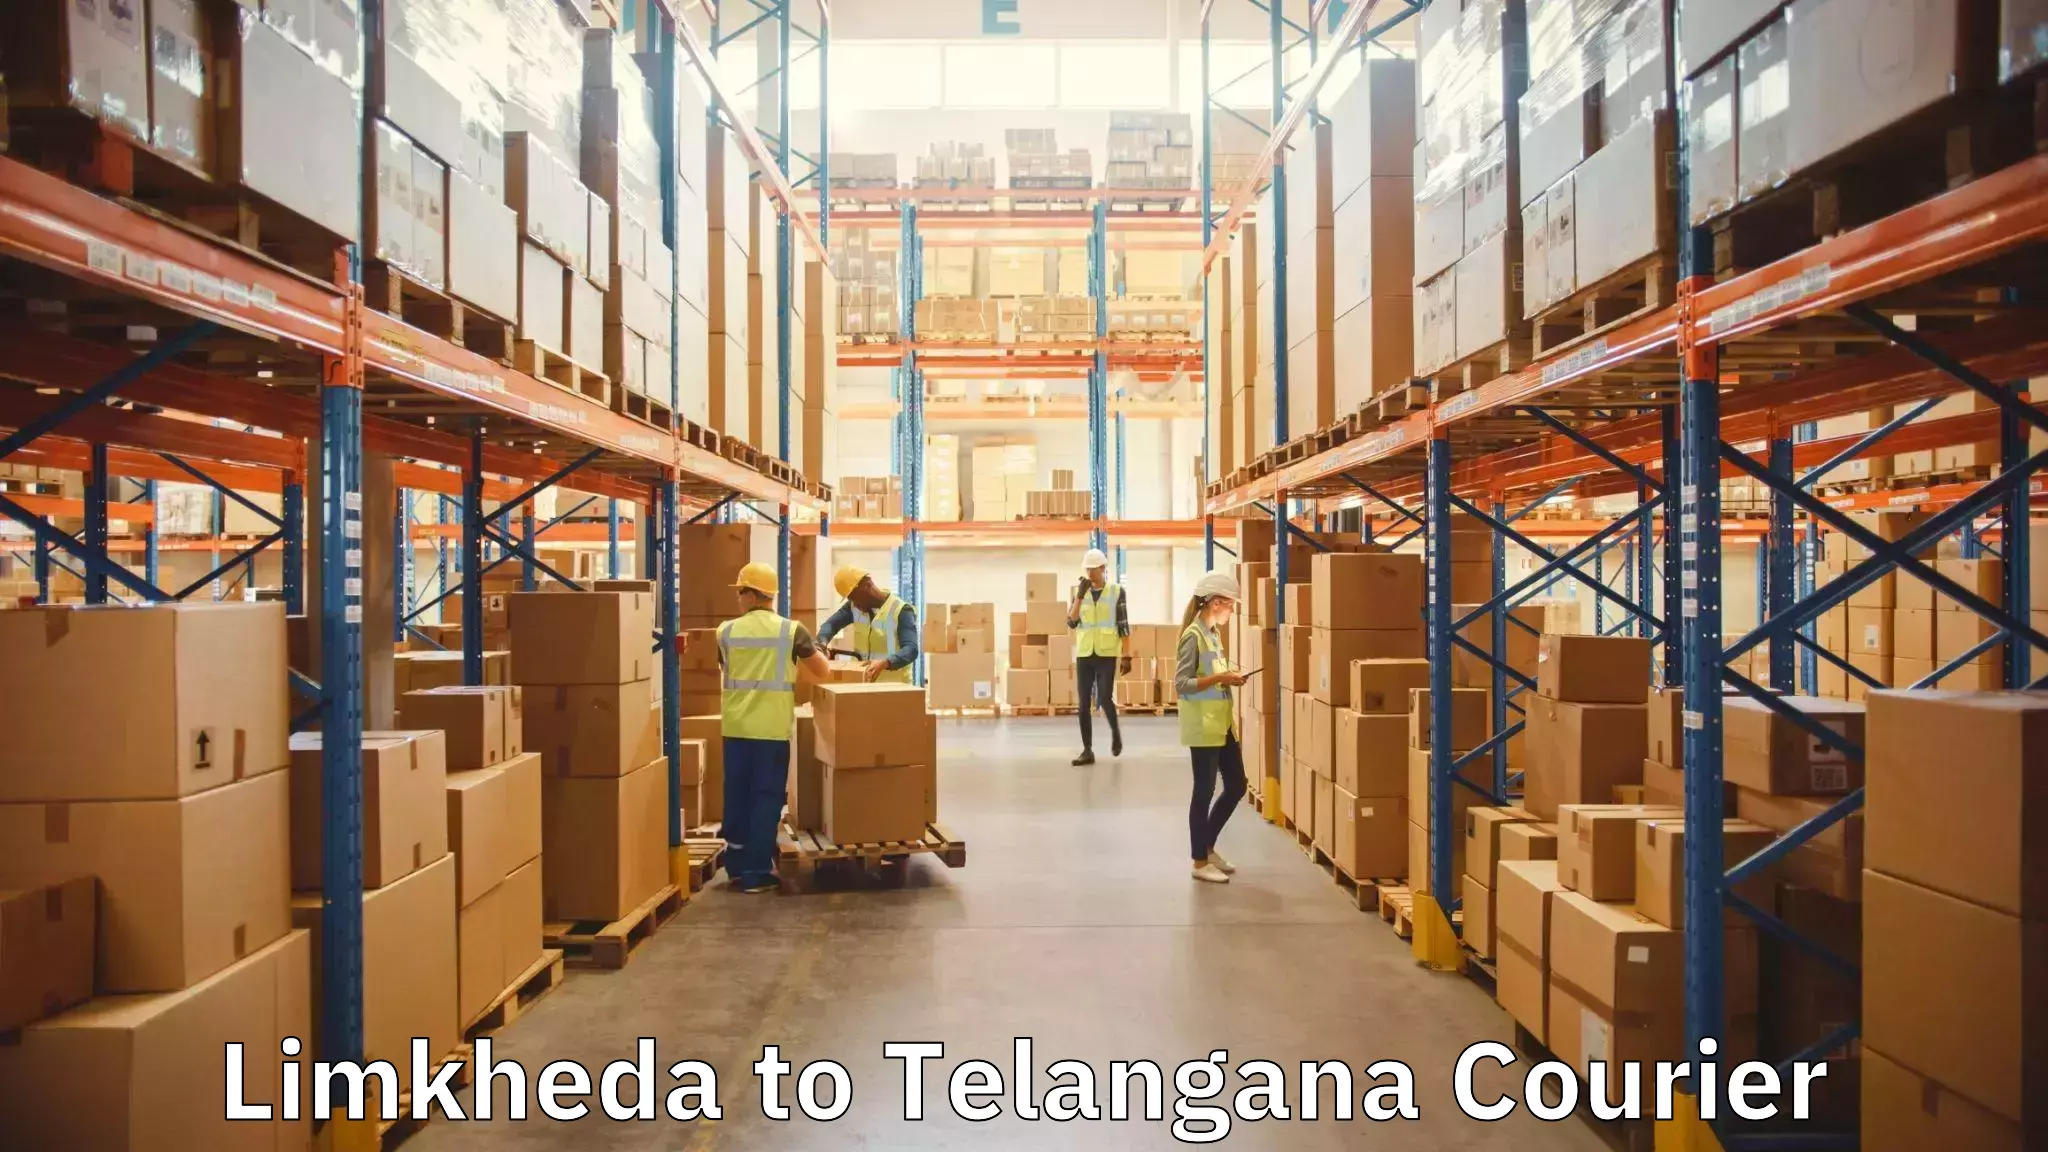 Professional movers and packers Limkheda to Gollapalli